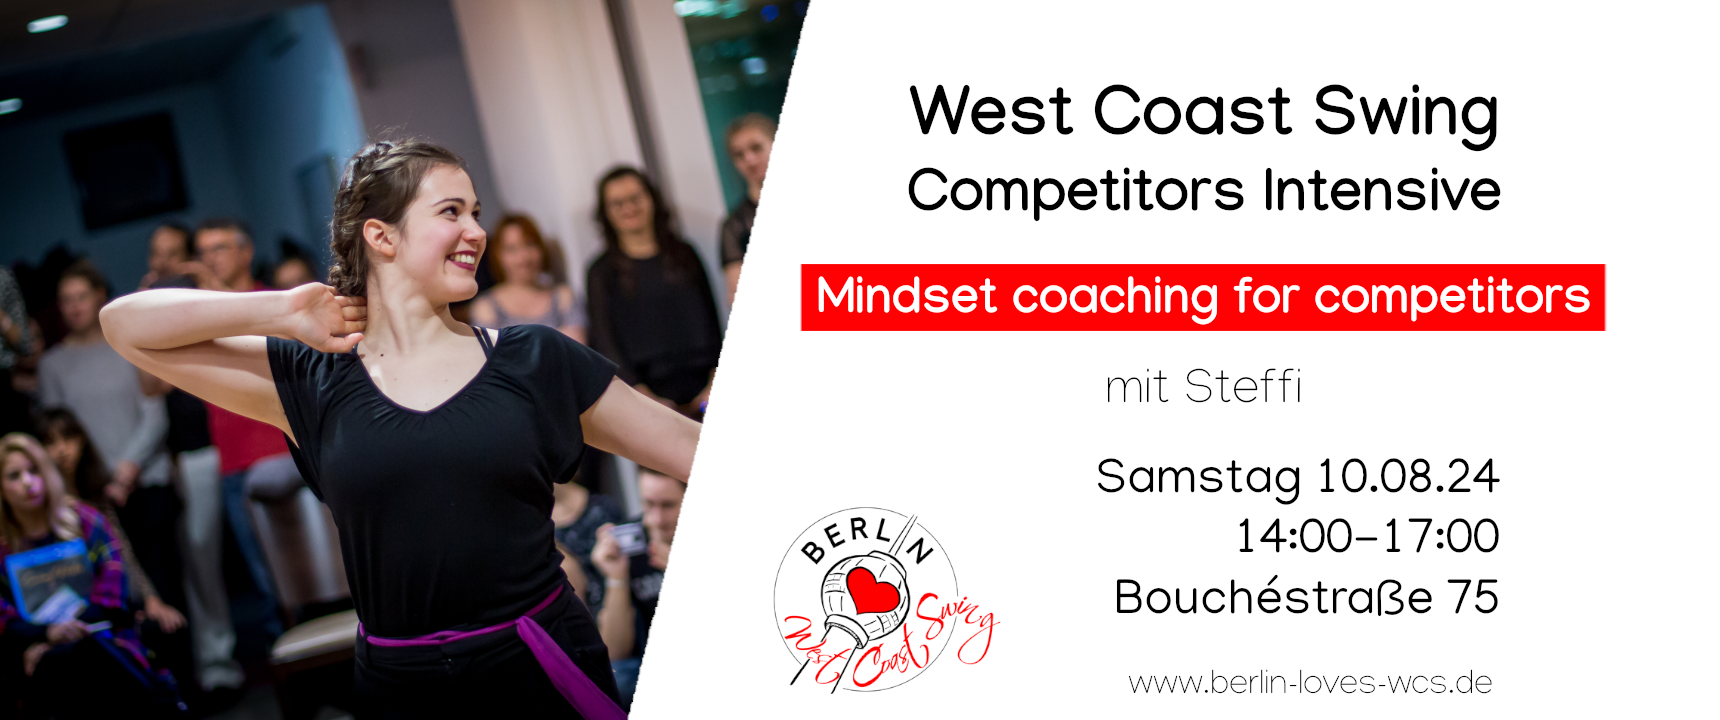 WCS Intensive für Competitors mit Steffi “Mindset coaching for competitors”